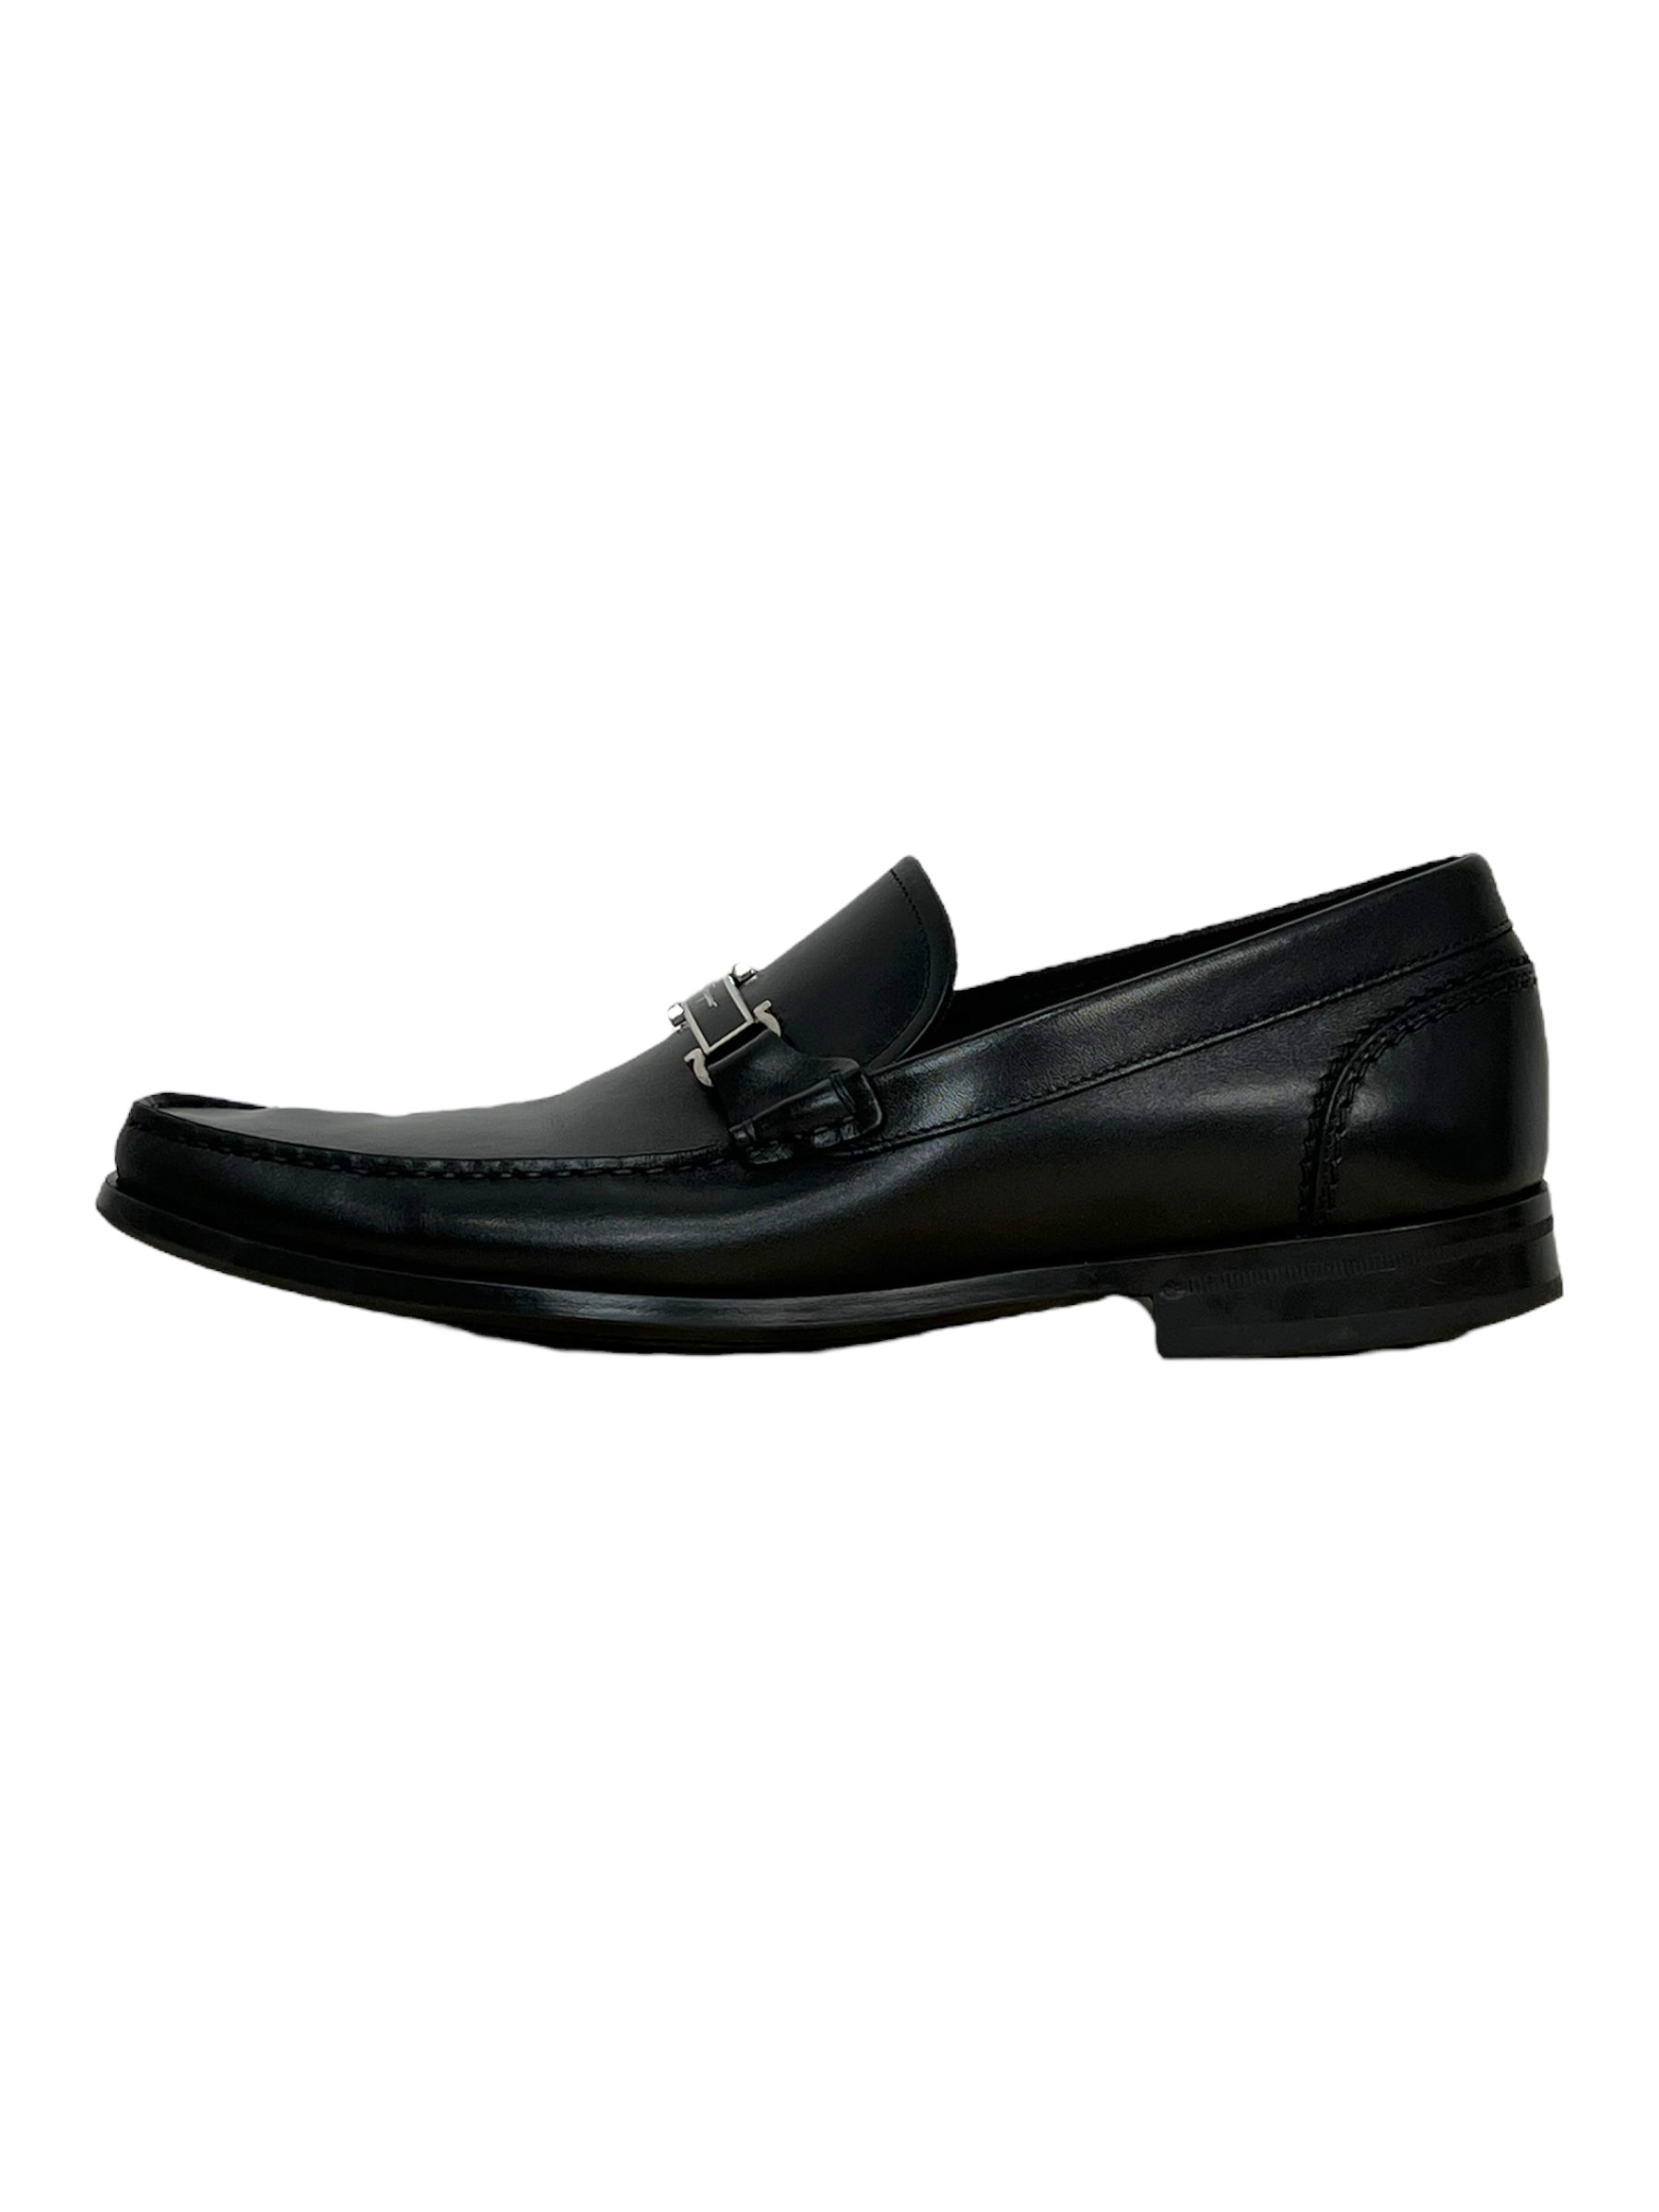 Salvatore Ferragamo Black Leather Loafers - Genuine Design Luxury Consignment for Men. New & Pre-Owned Clothing, Shoes, & Accessories. Calgary, Canada